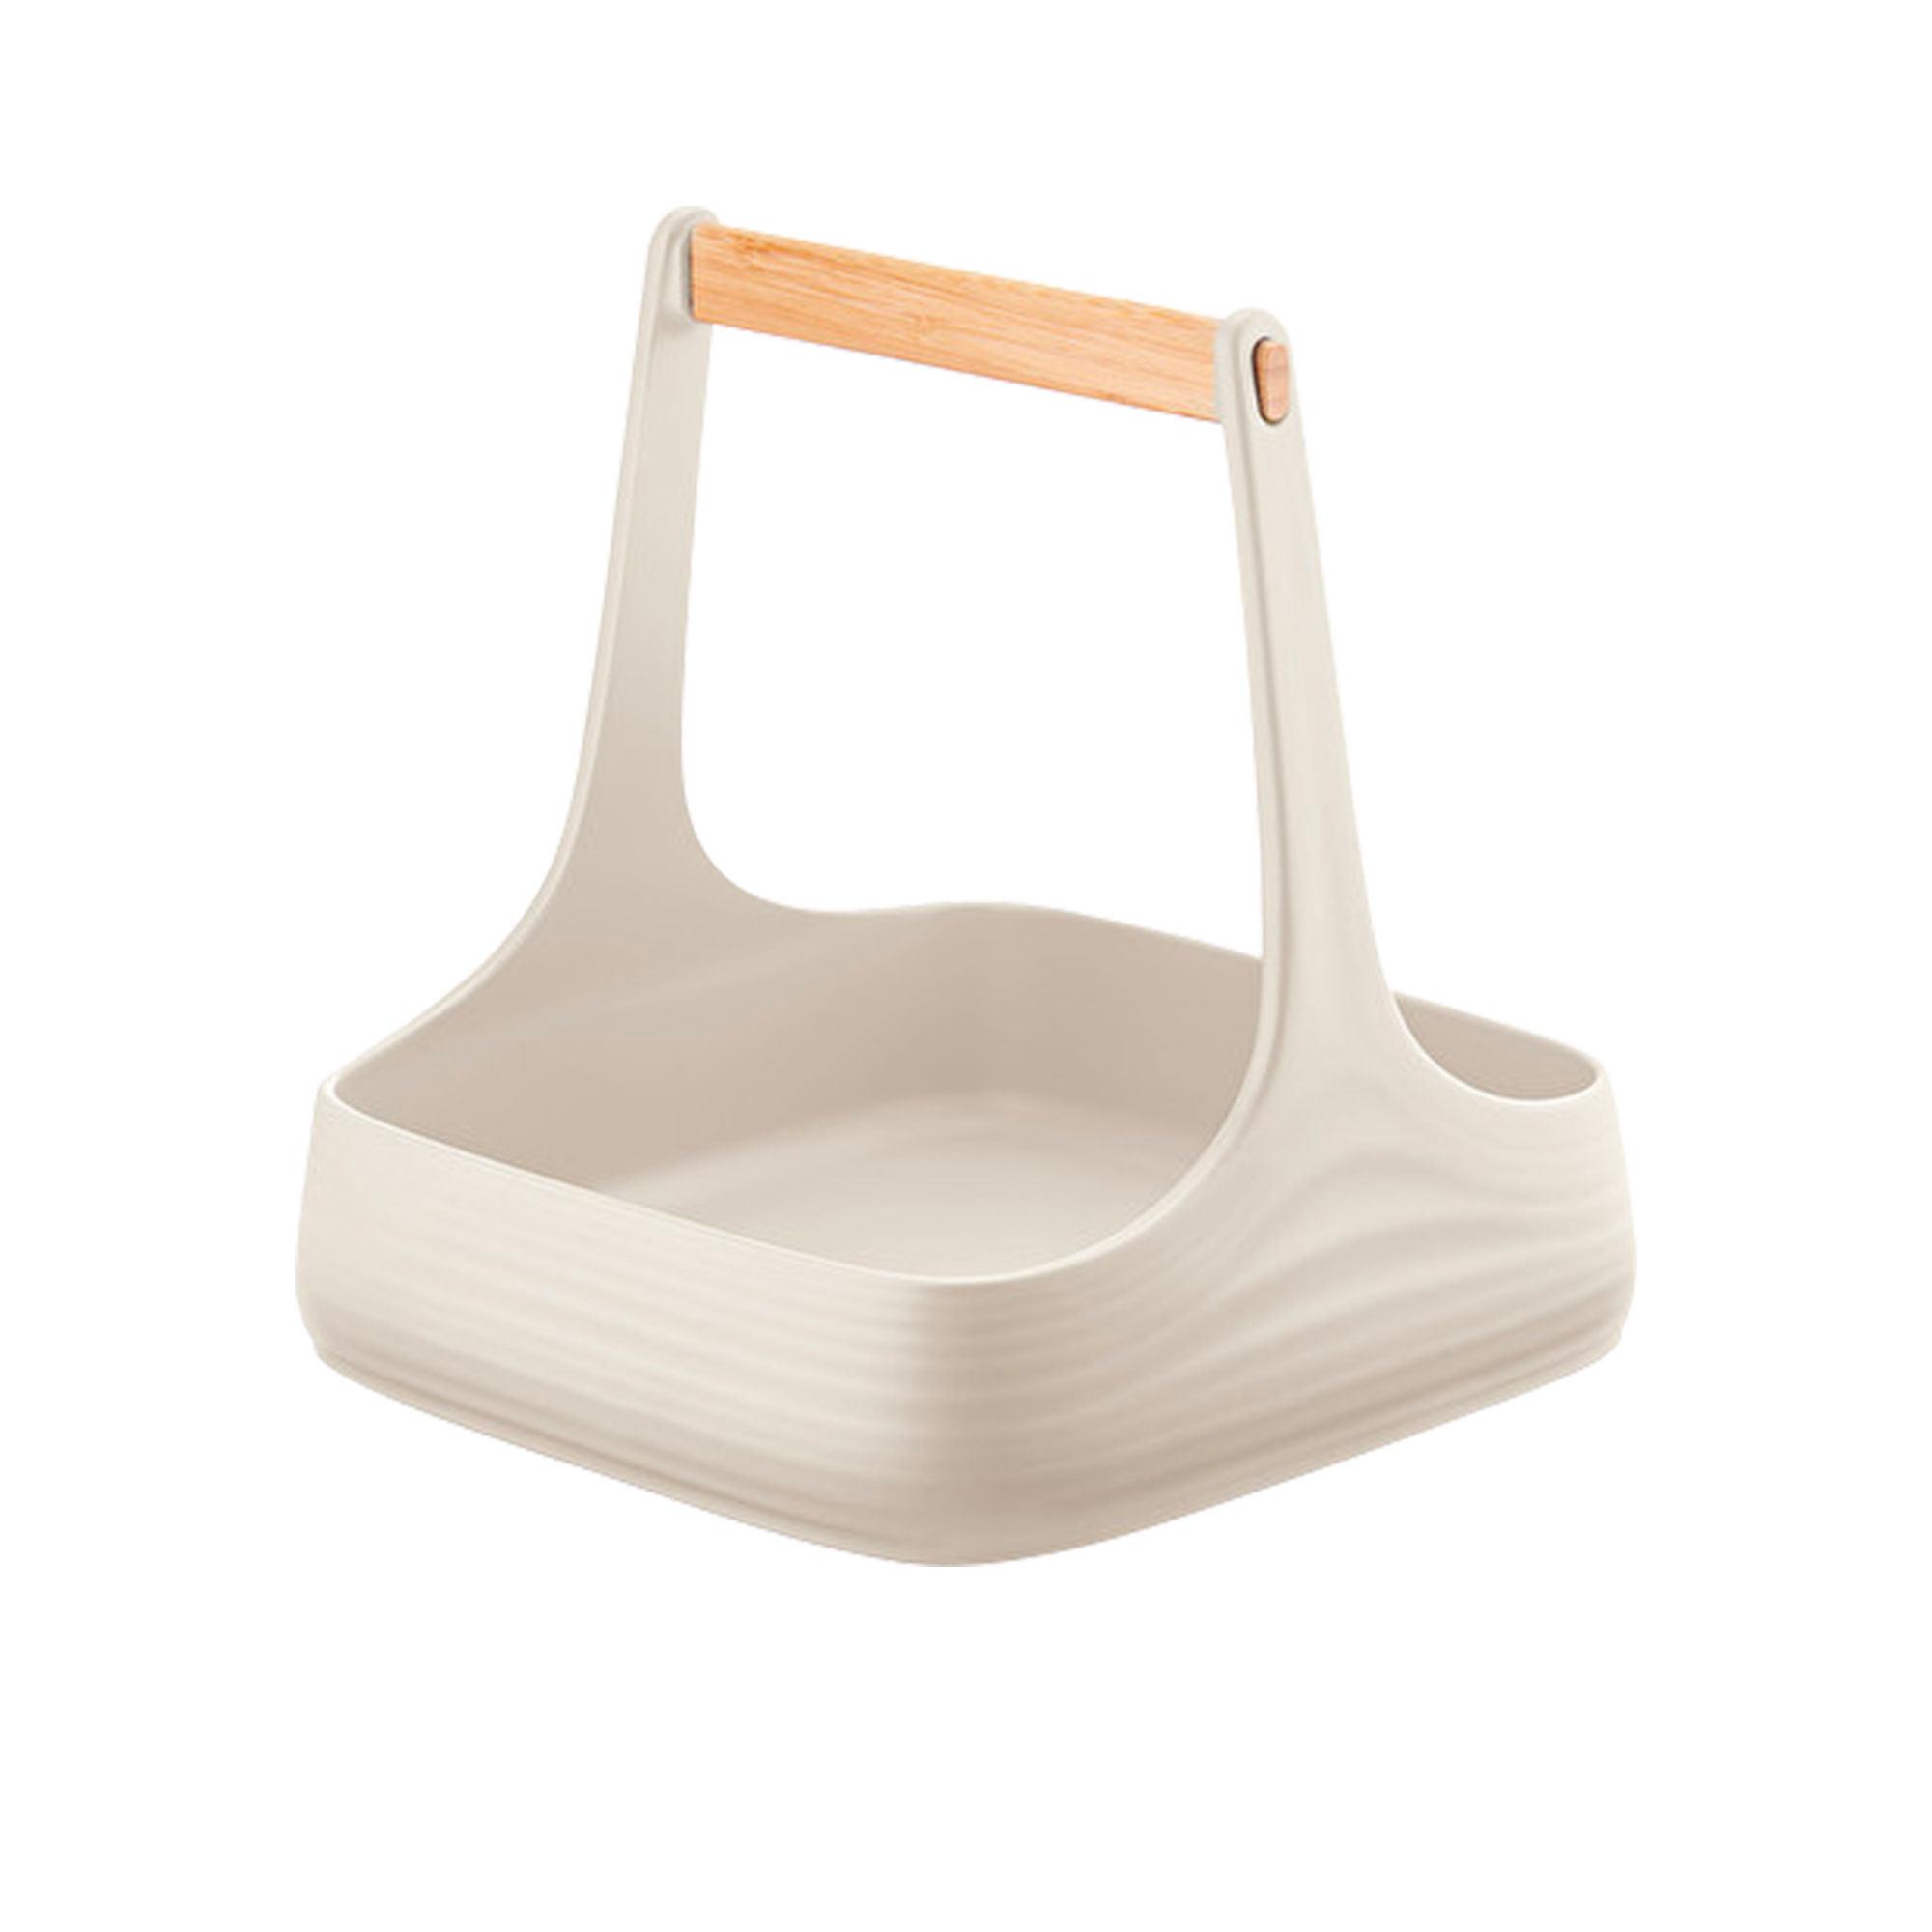 Guzzini Earth All Together Table Caddy White Image 1